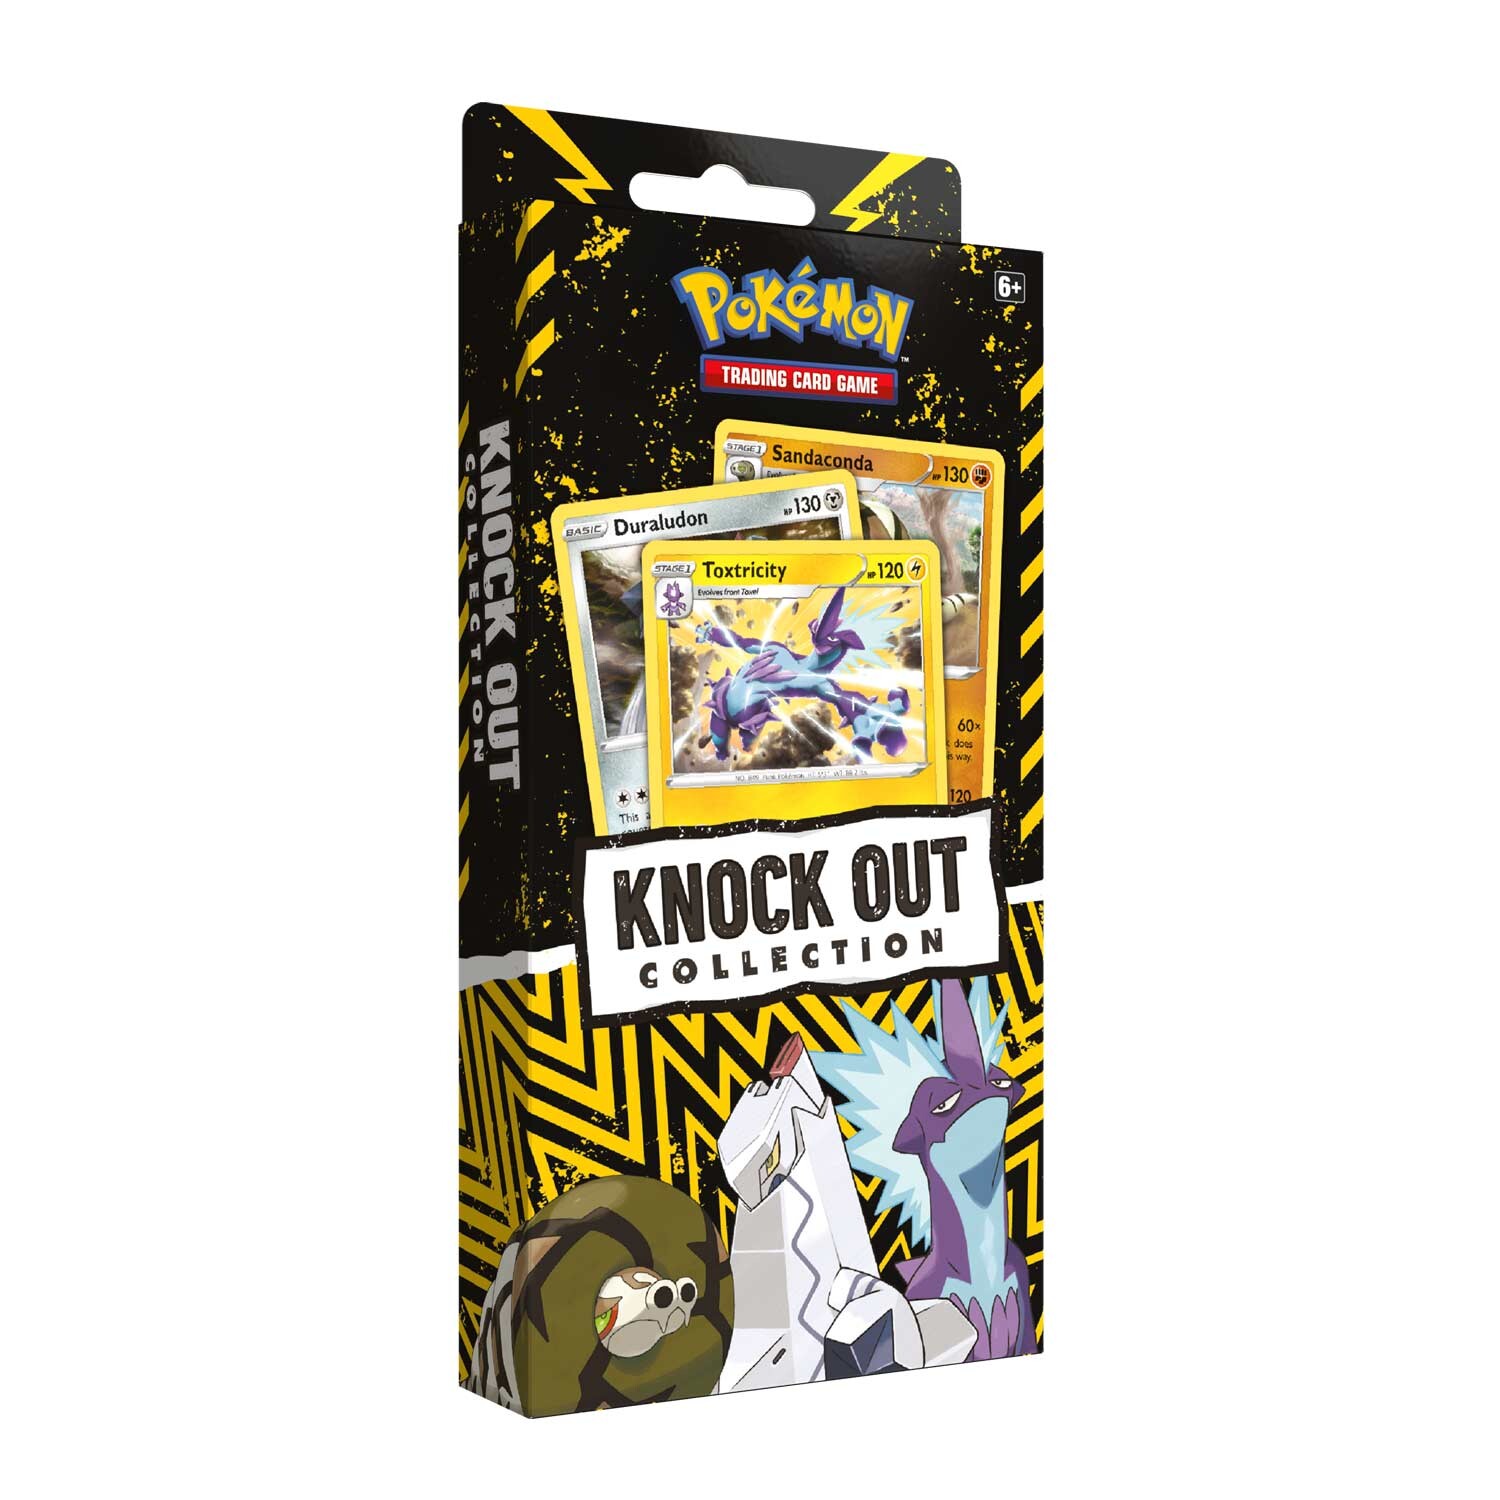 Pokemon: Knock Out Collection - Sandaconda, Duraludon & Toxtricity